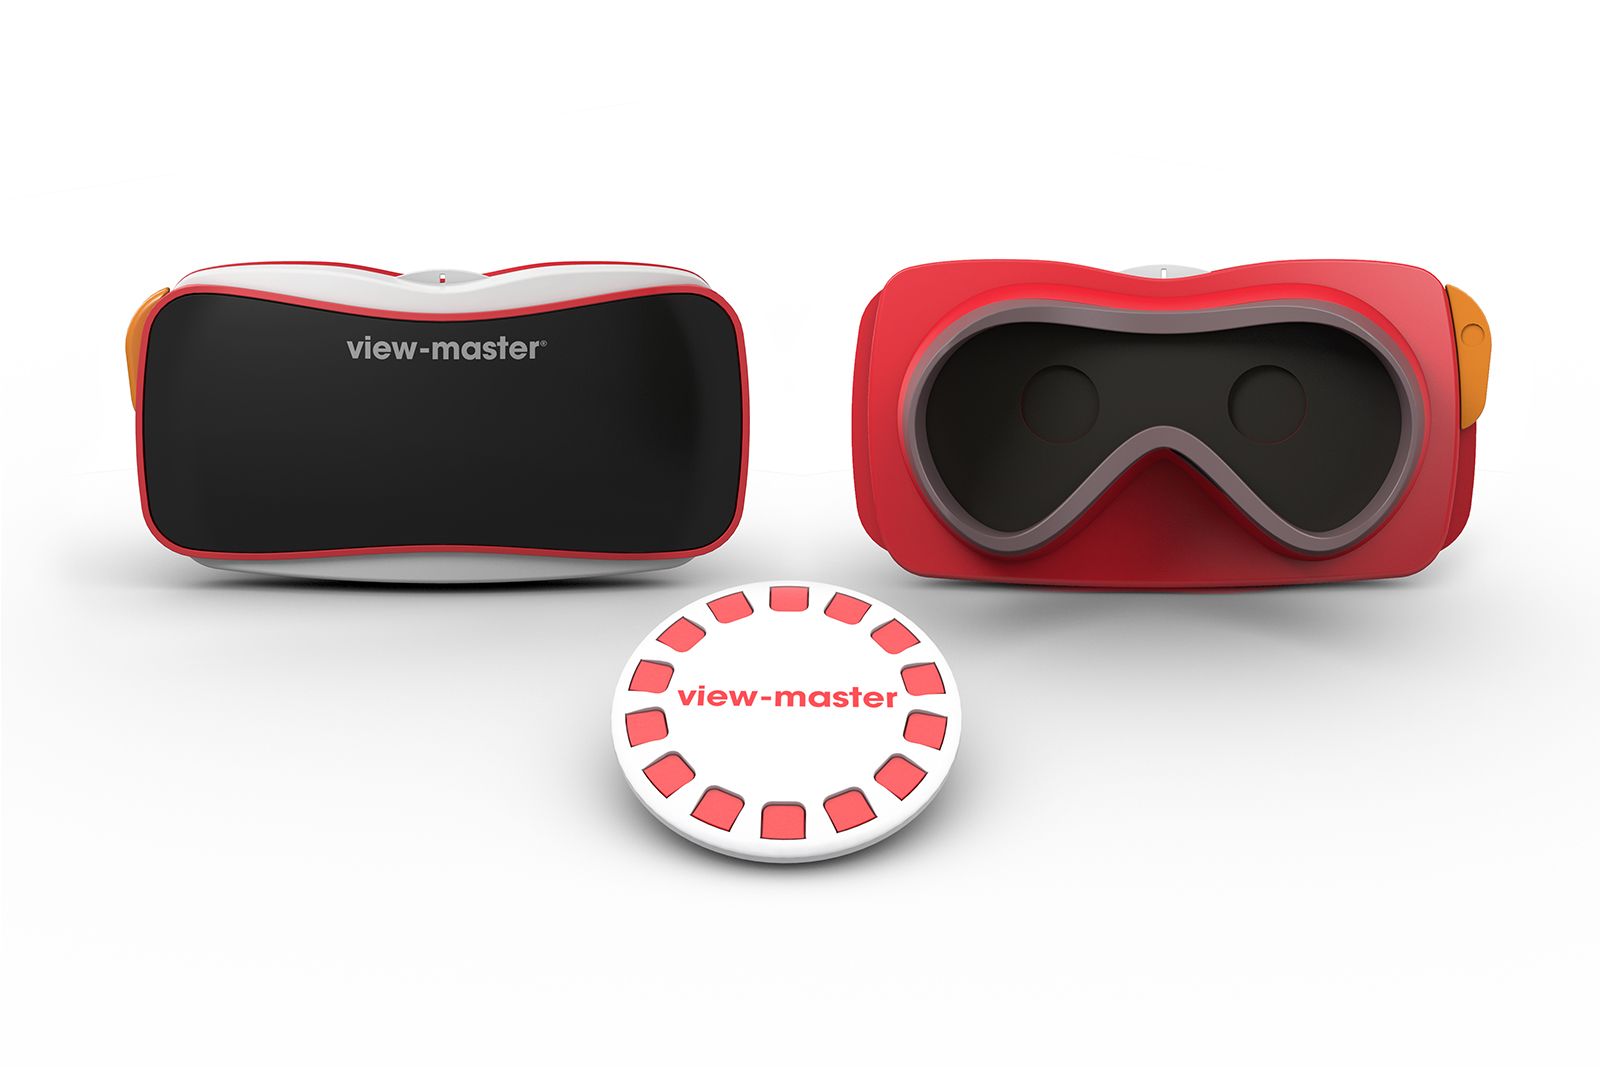 view master returns as an android vr headset thanks to mattel and google image 1